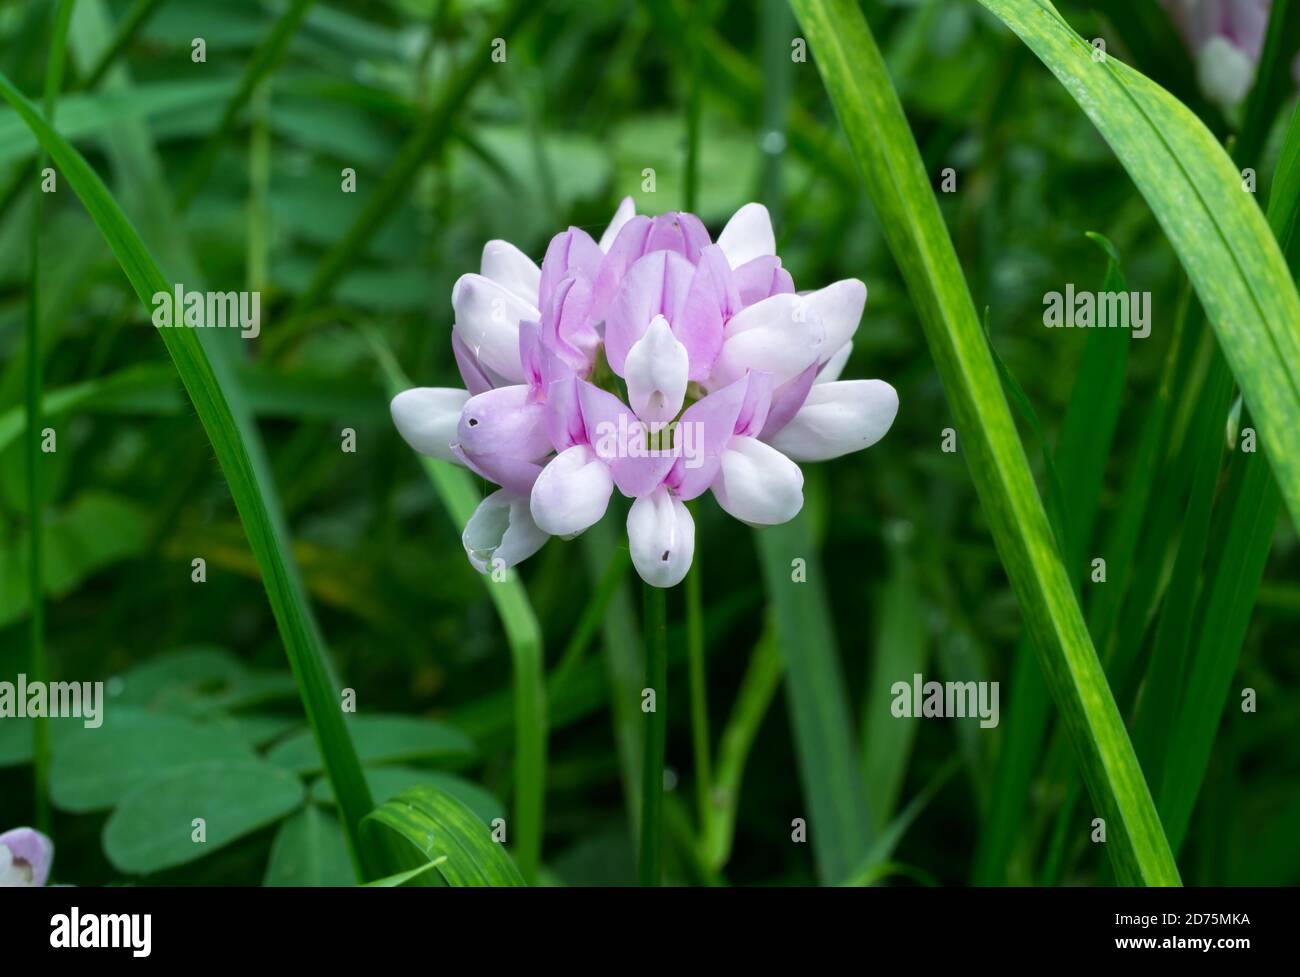 The Crownvetch or Securigera varia which is toxic for horses but not ruminants. Stock Photo